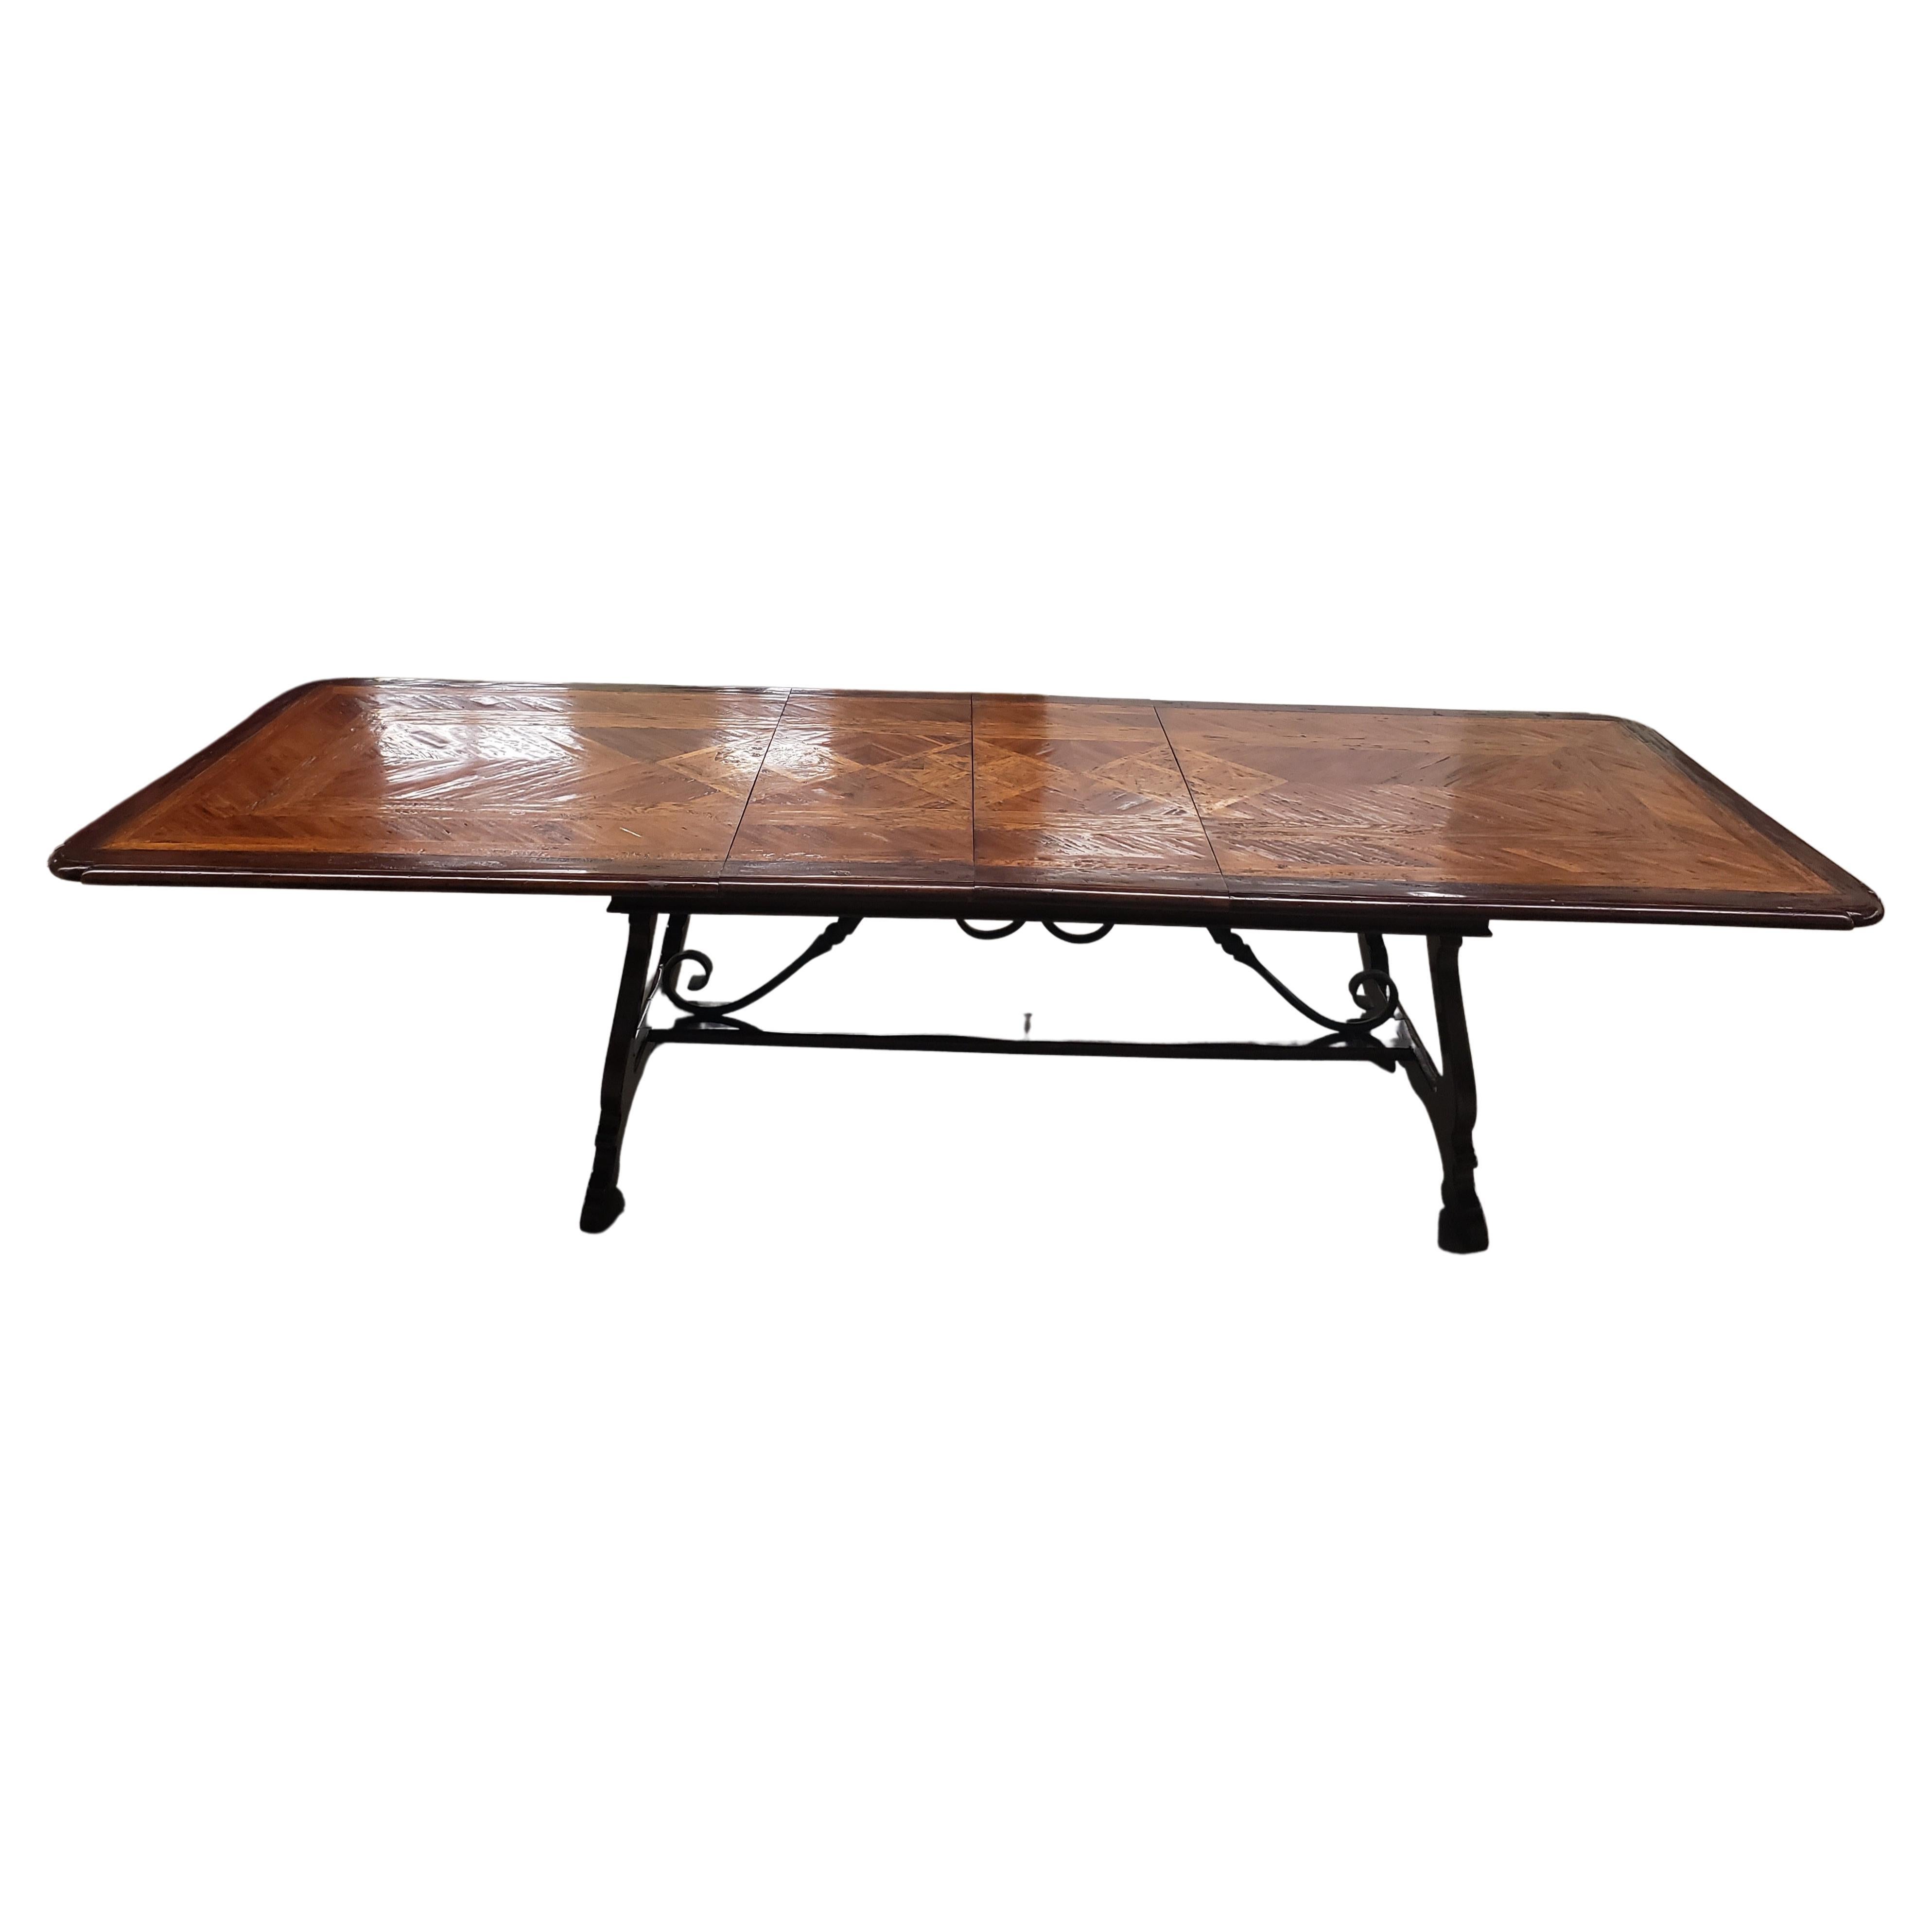 American Dennis & Leen Baroque Style Walnut Oak Mahogany Parquetry Trestle Dining Table  For Sale